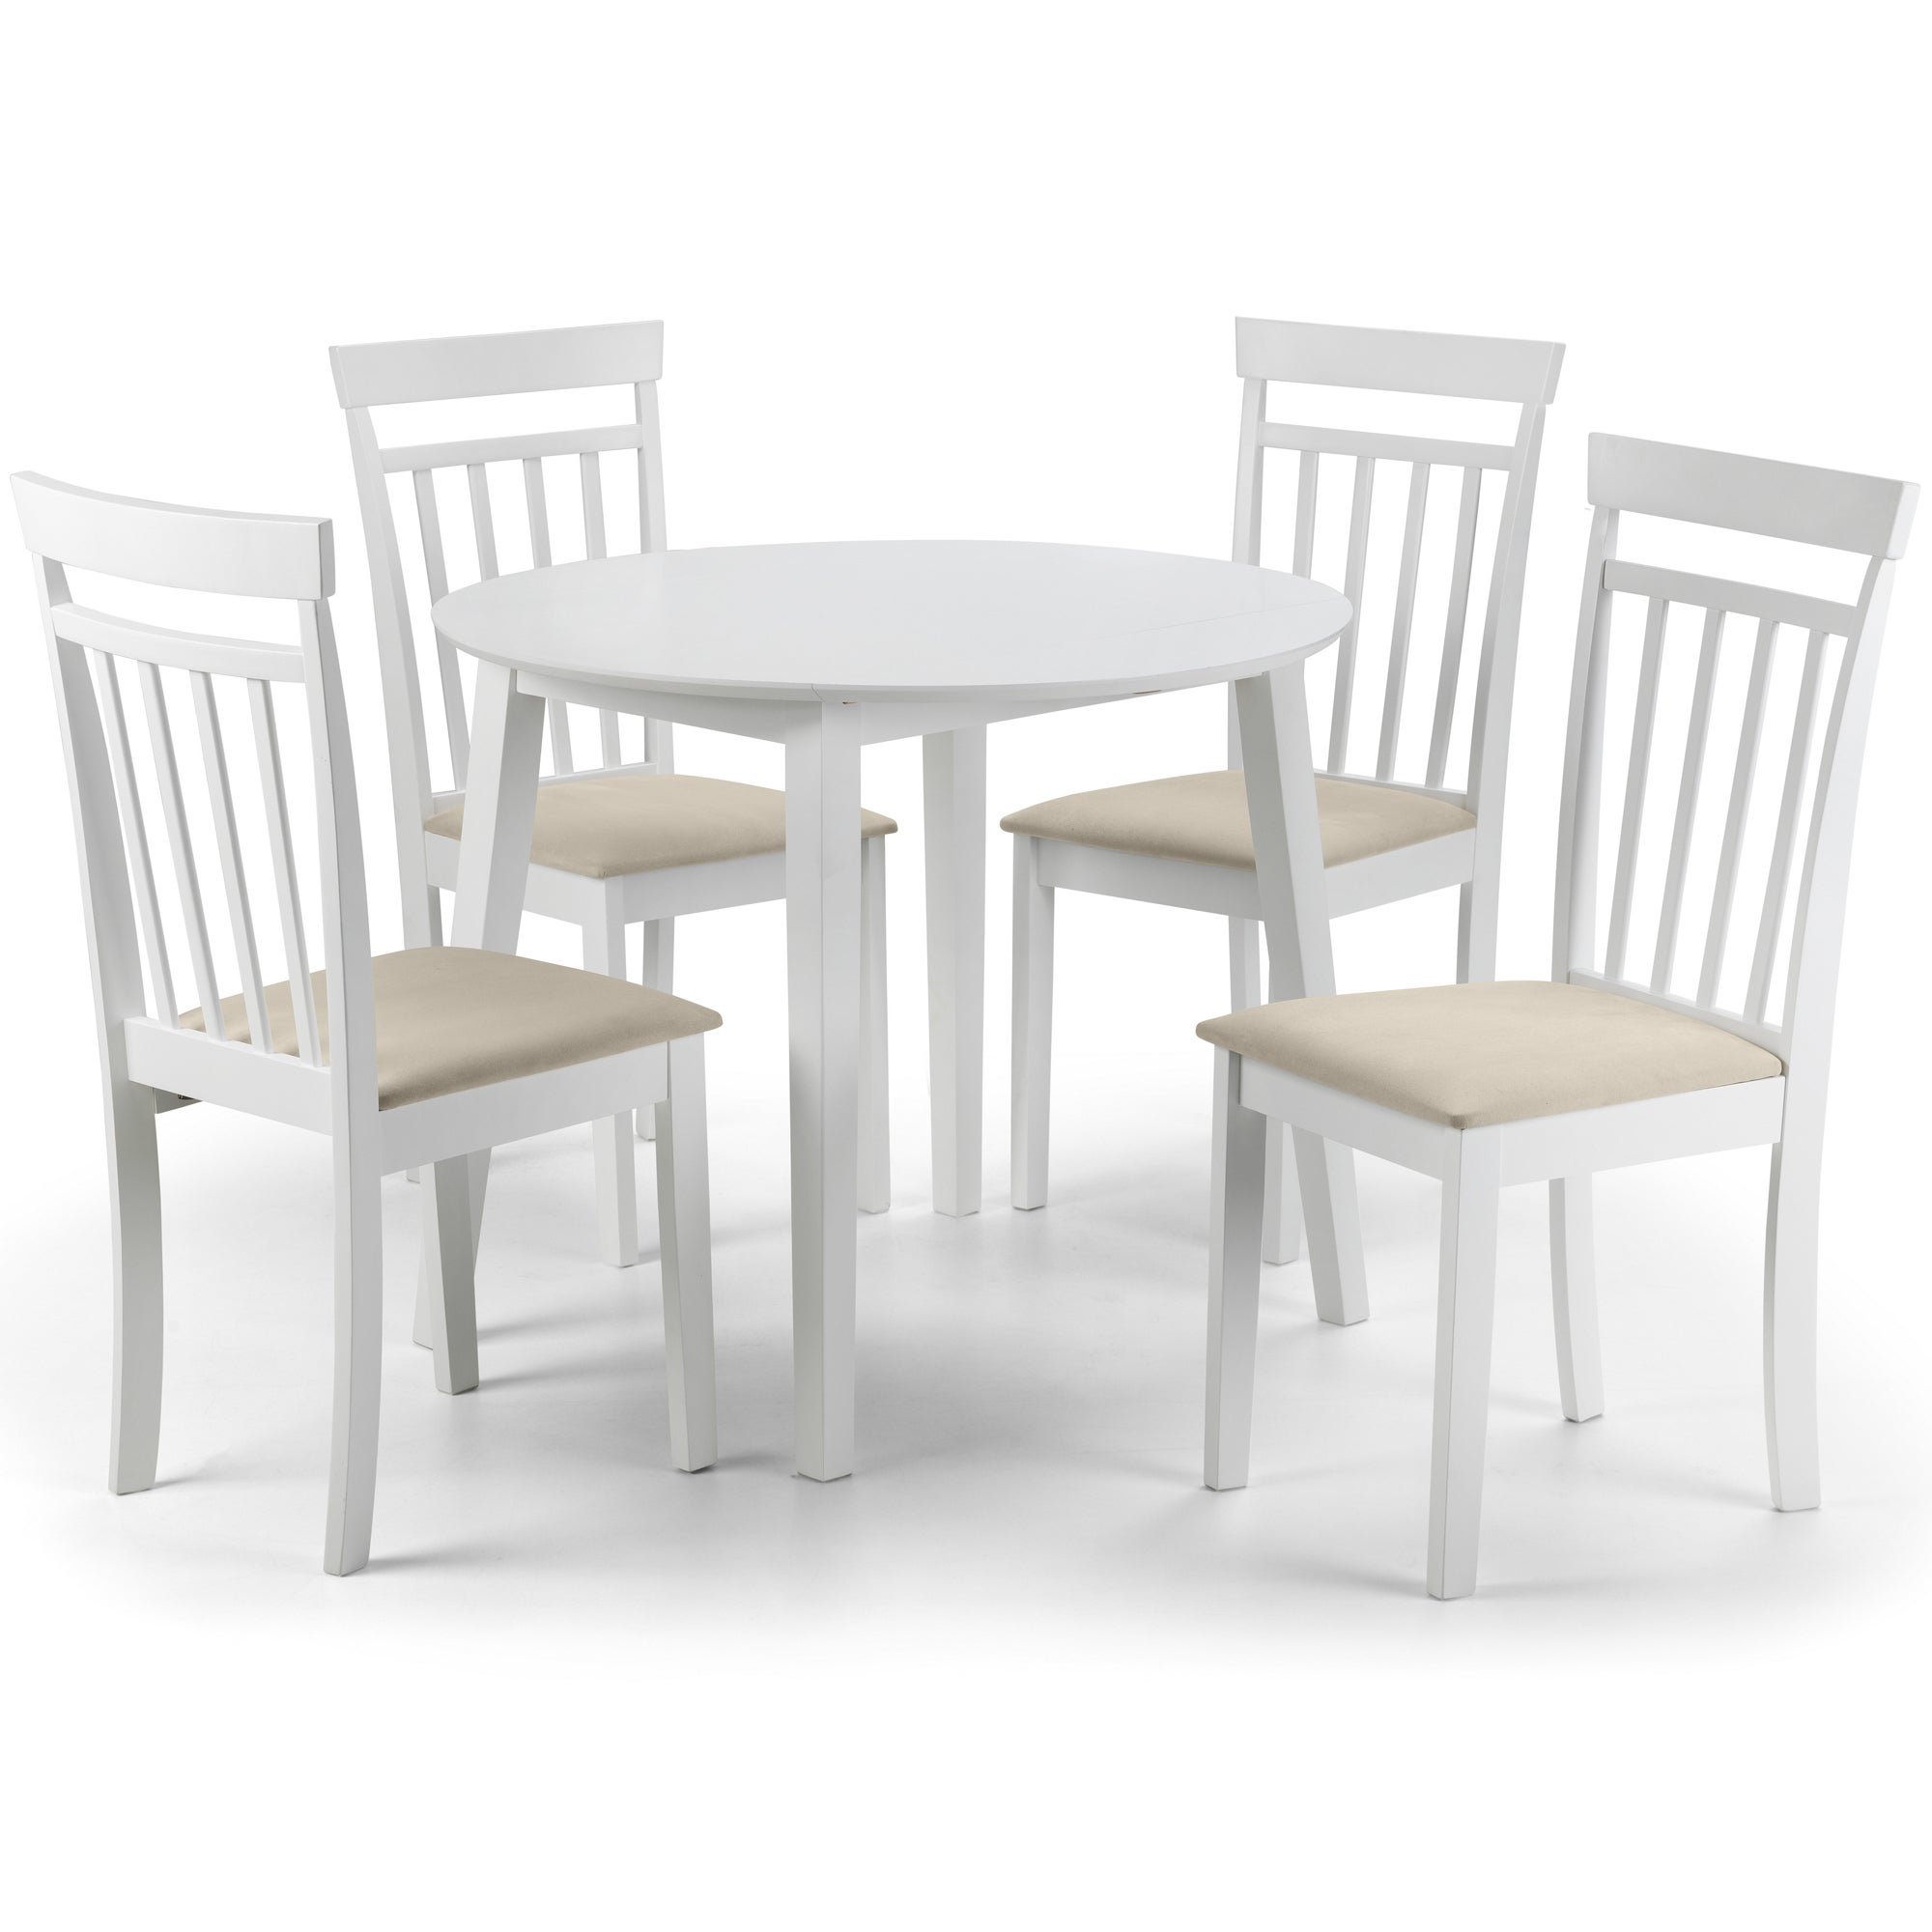 Coast Round Extendable Dining Table with 4 Chairs White